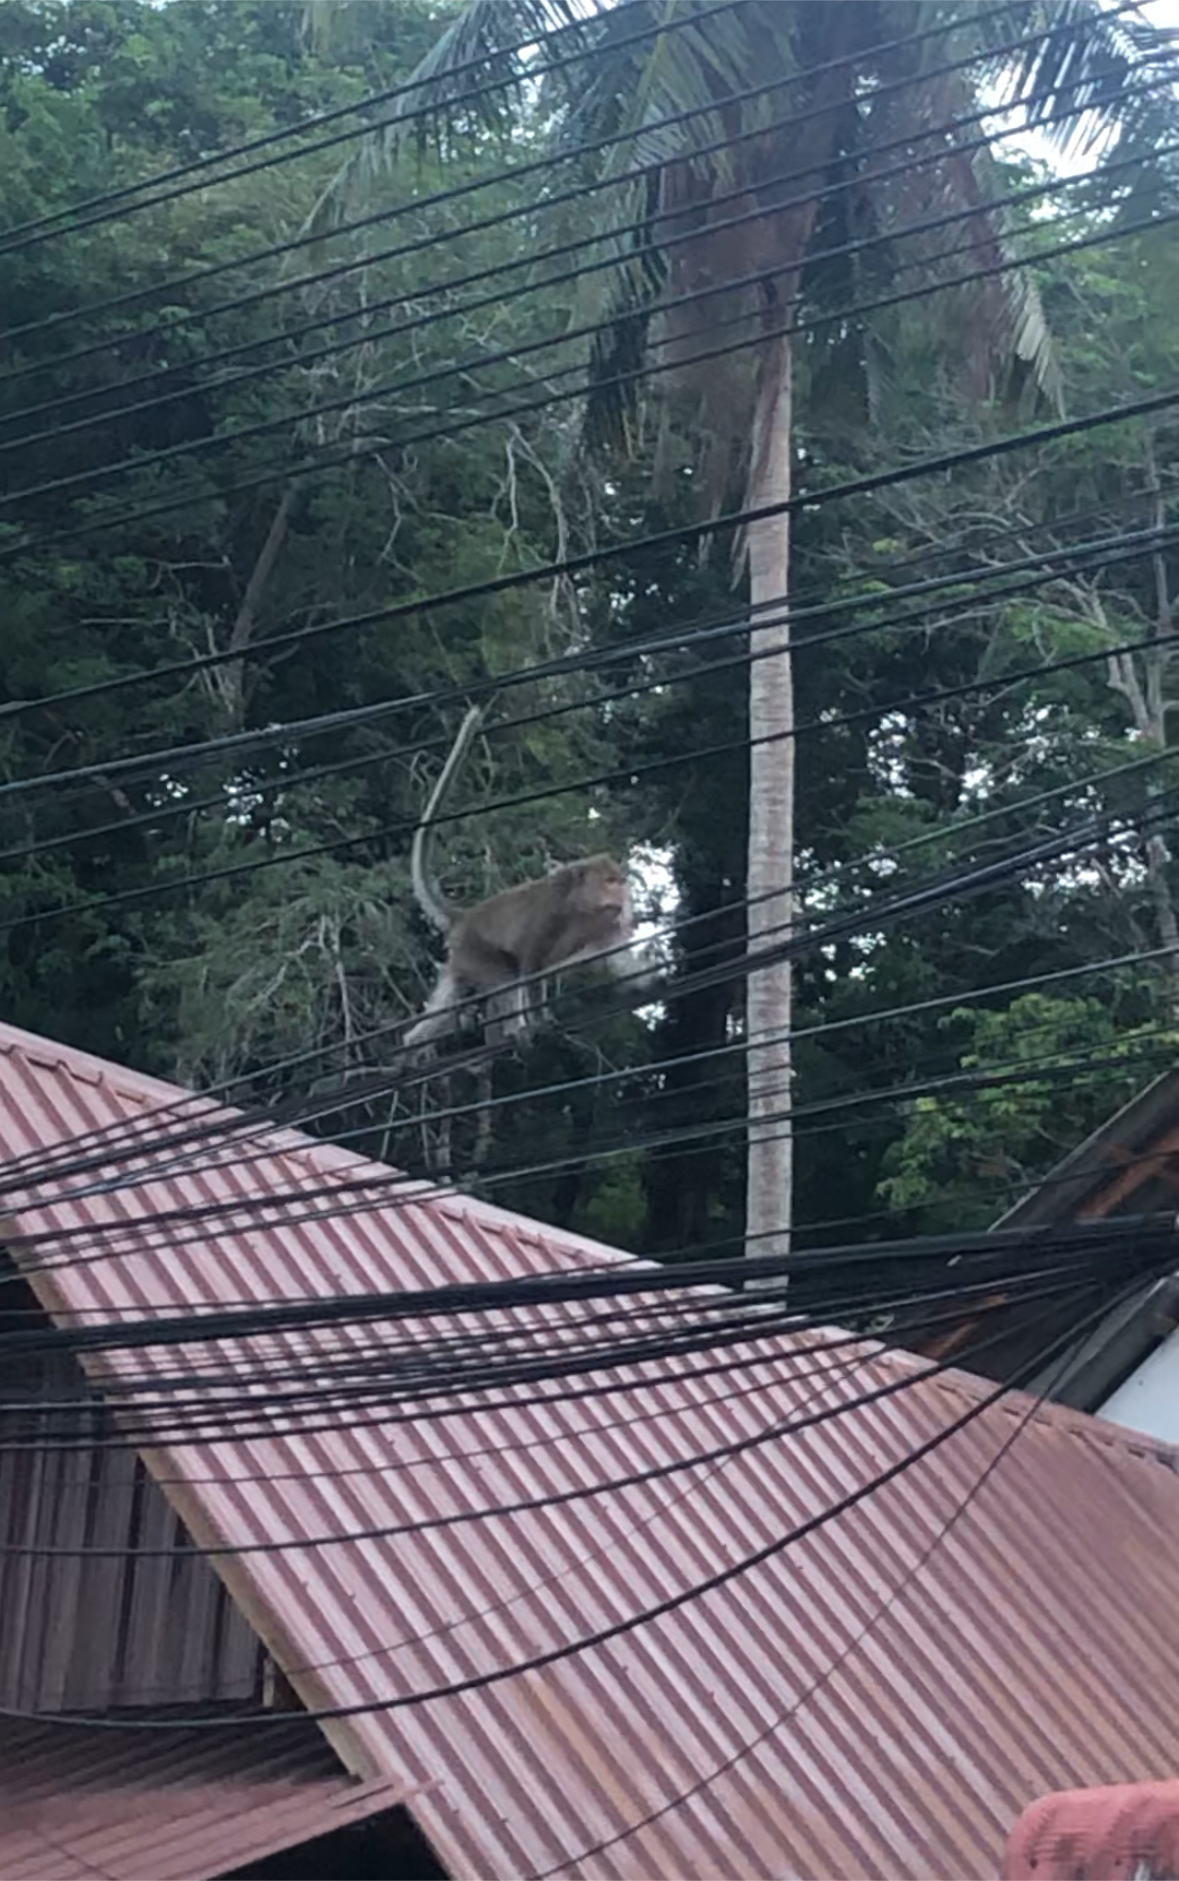 monkey on wire Koh Chang